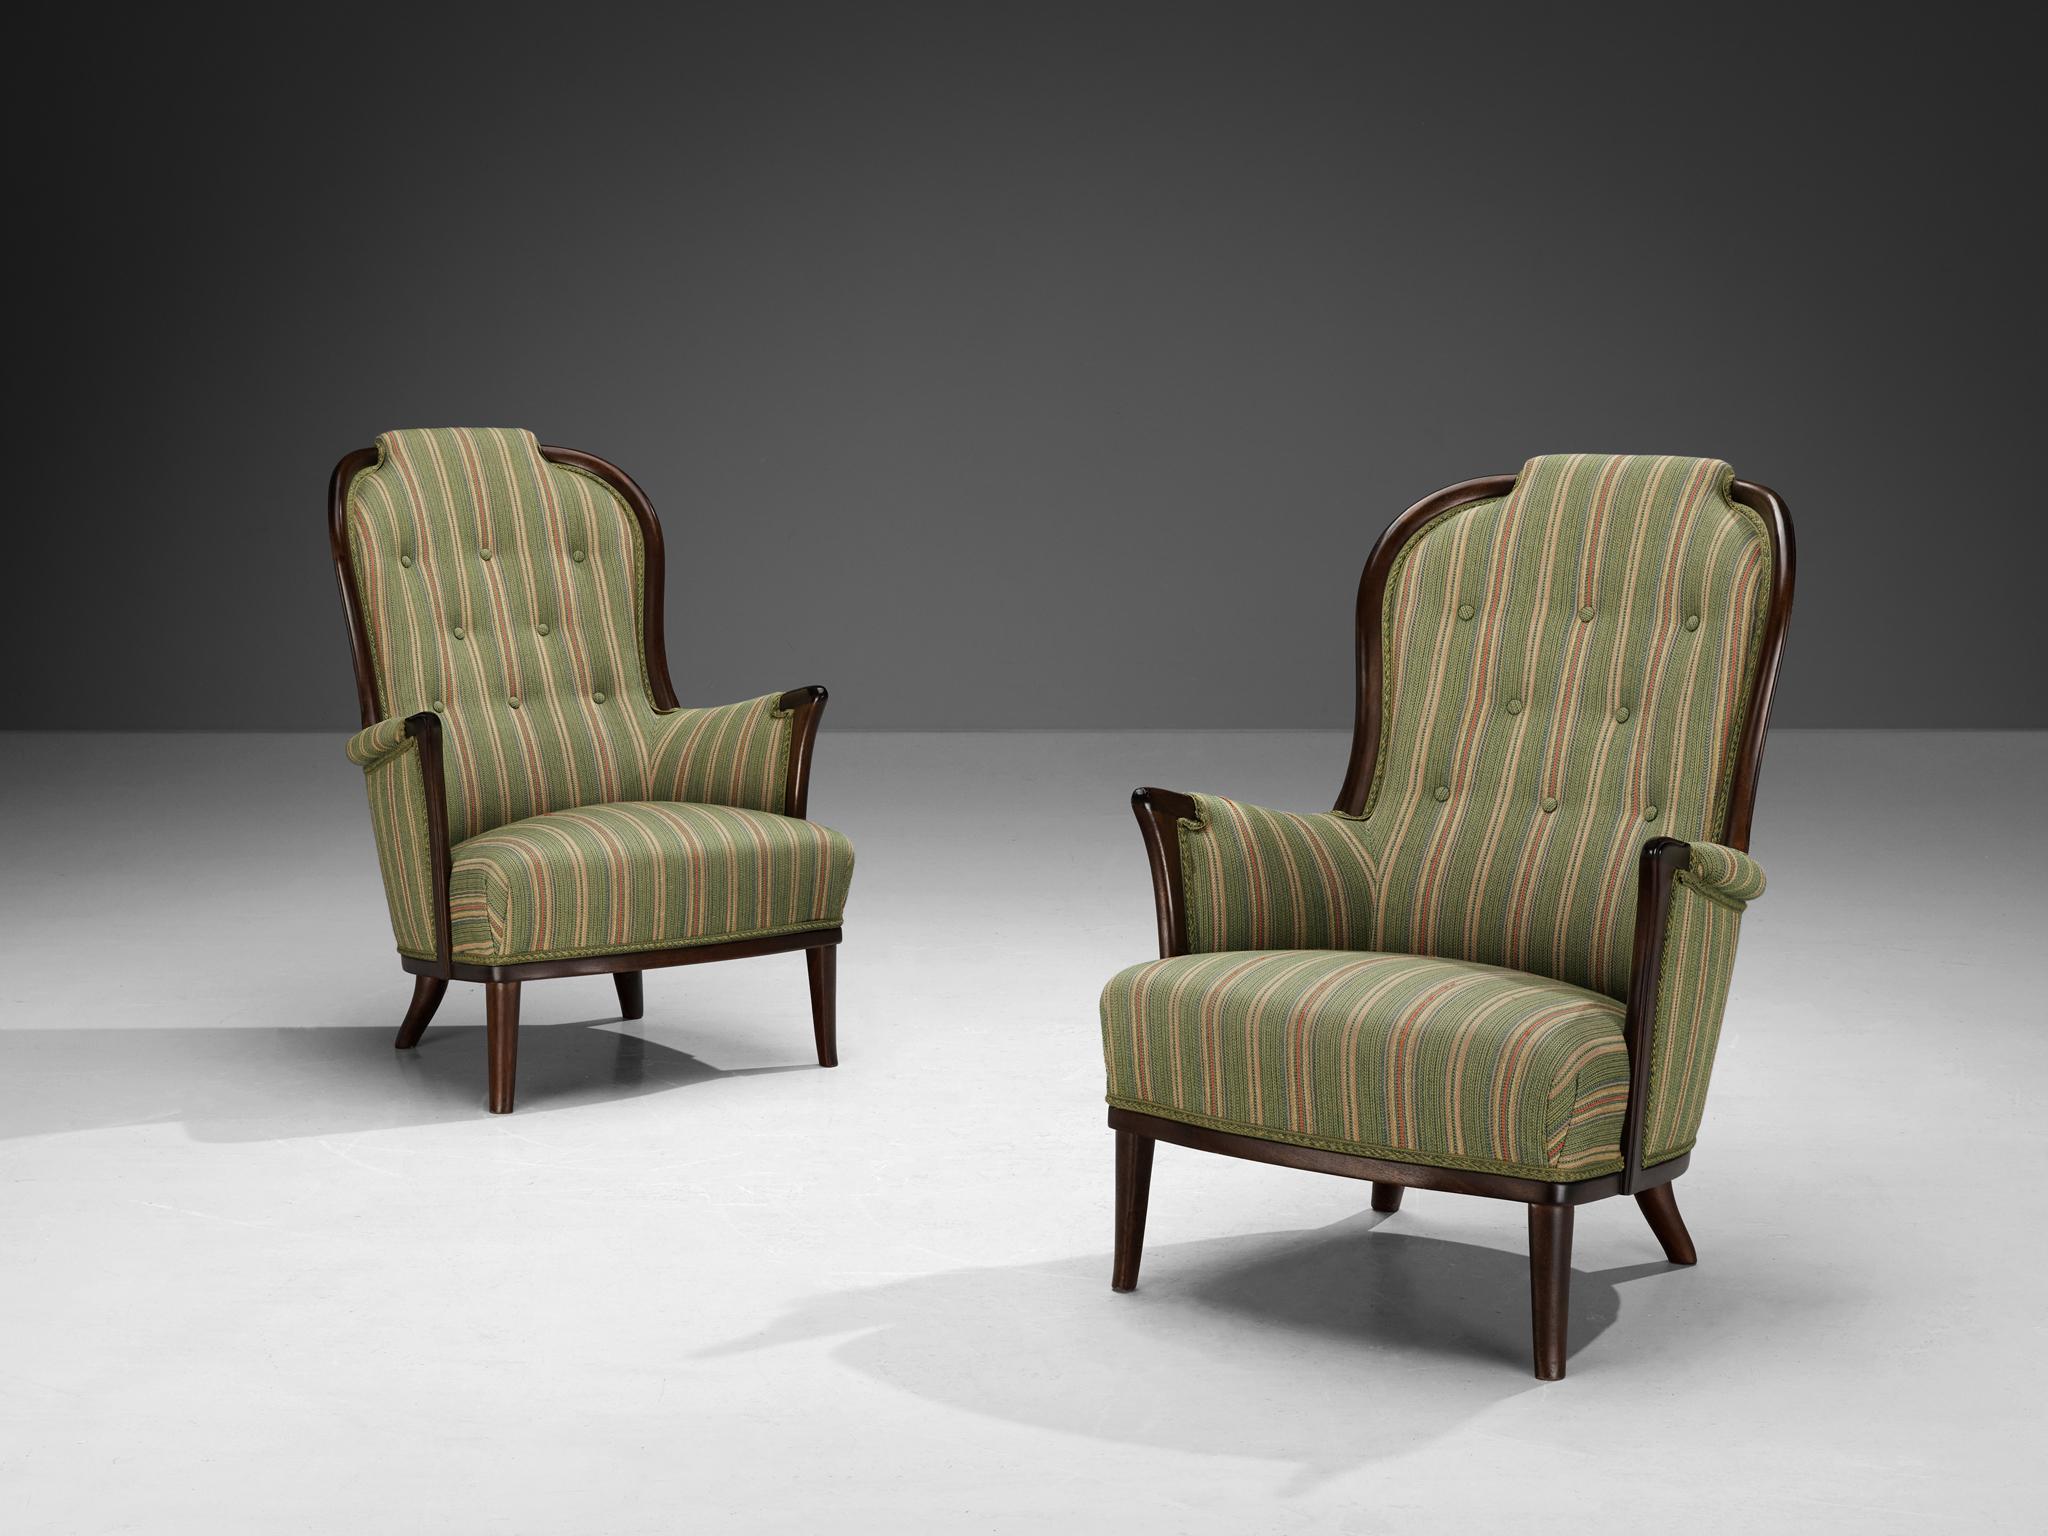 Carl Malmsten for AB O.H. Sjögren, pair of easy chairs, fabric, mahogany, Tranås, Sweden, 1987

Pair of wonderful chairs that are very well designed by Carl Malmsten. The armchairs are upholstered in the original fabric mainly in the color green